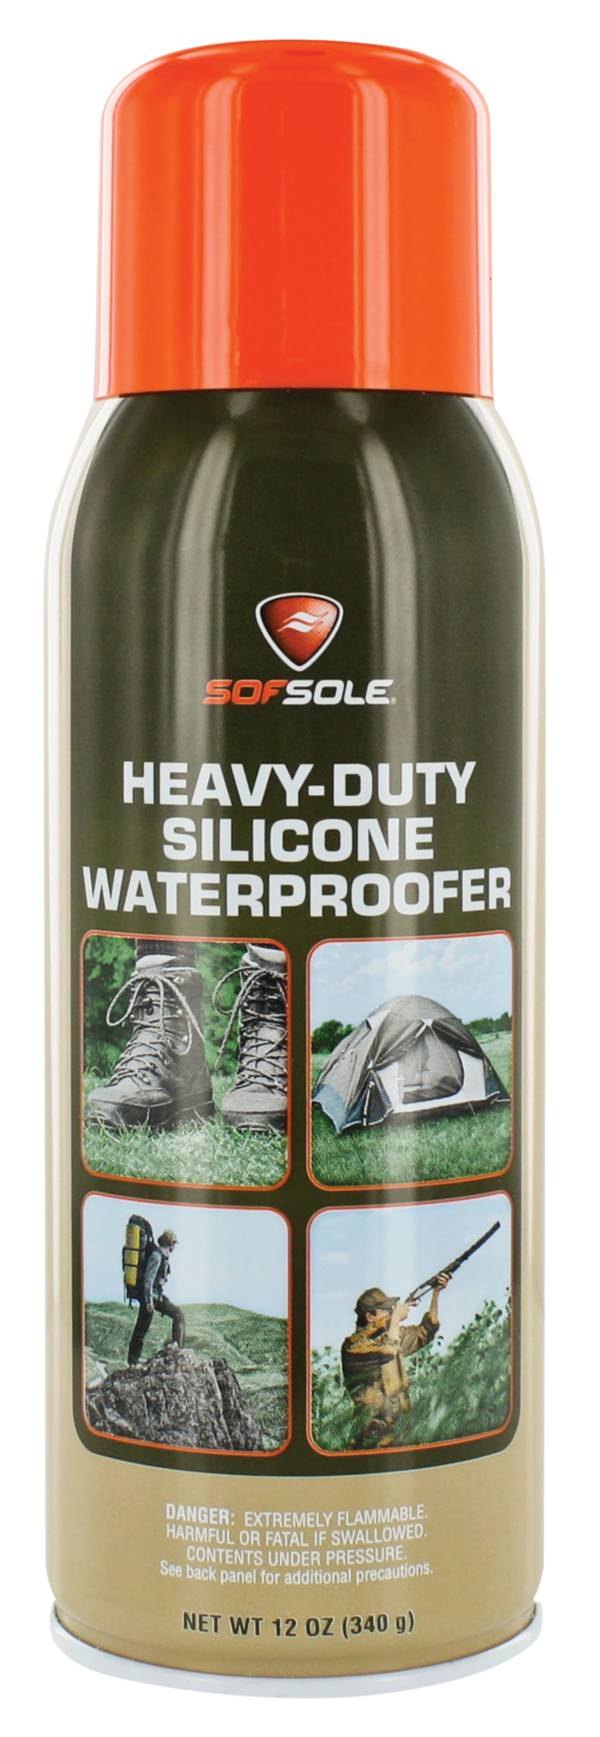 Sof Sole Heavy Duty Silicone Waterproofer product image